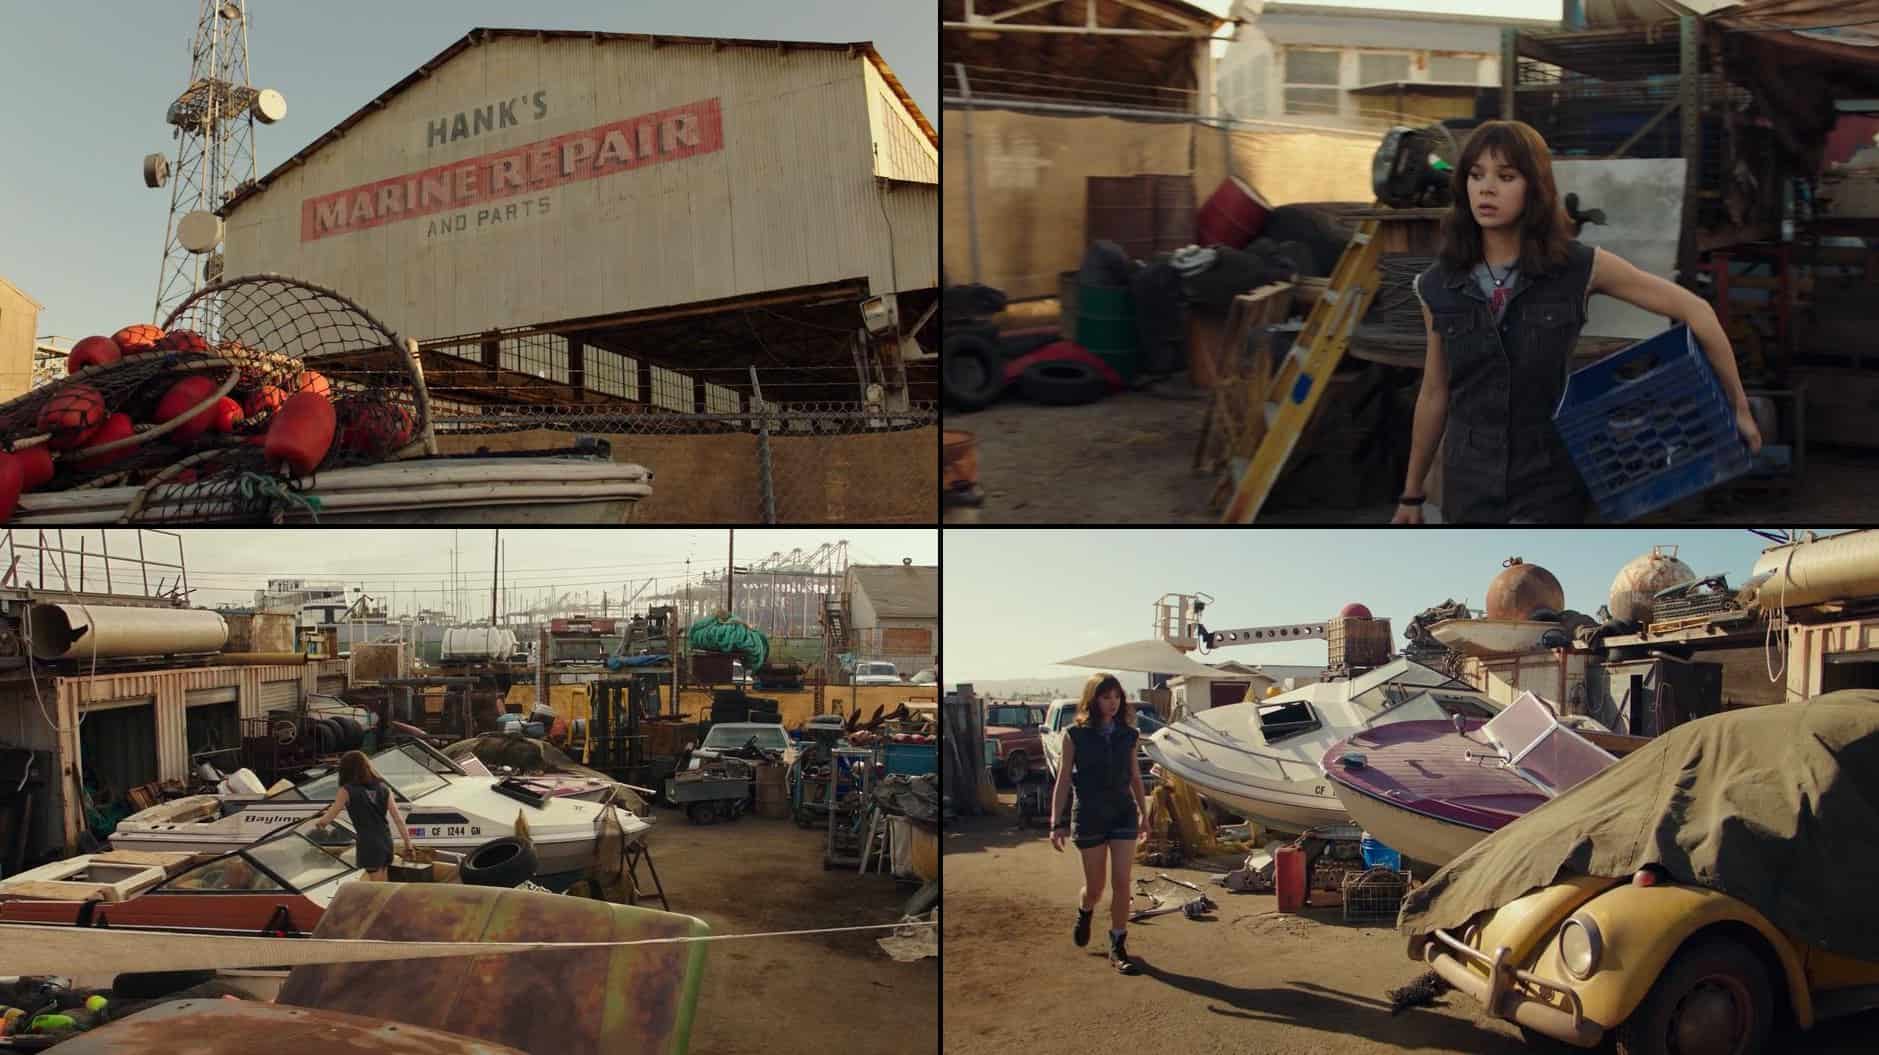 Charlie Finds Bumblebee At Hank's Marine Repair In The Movie